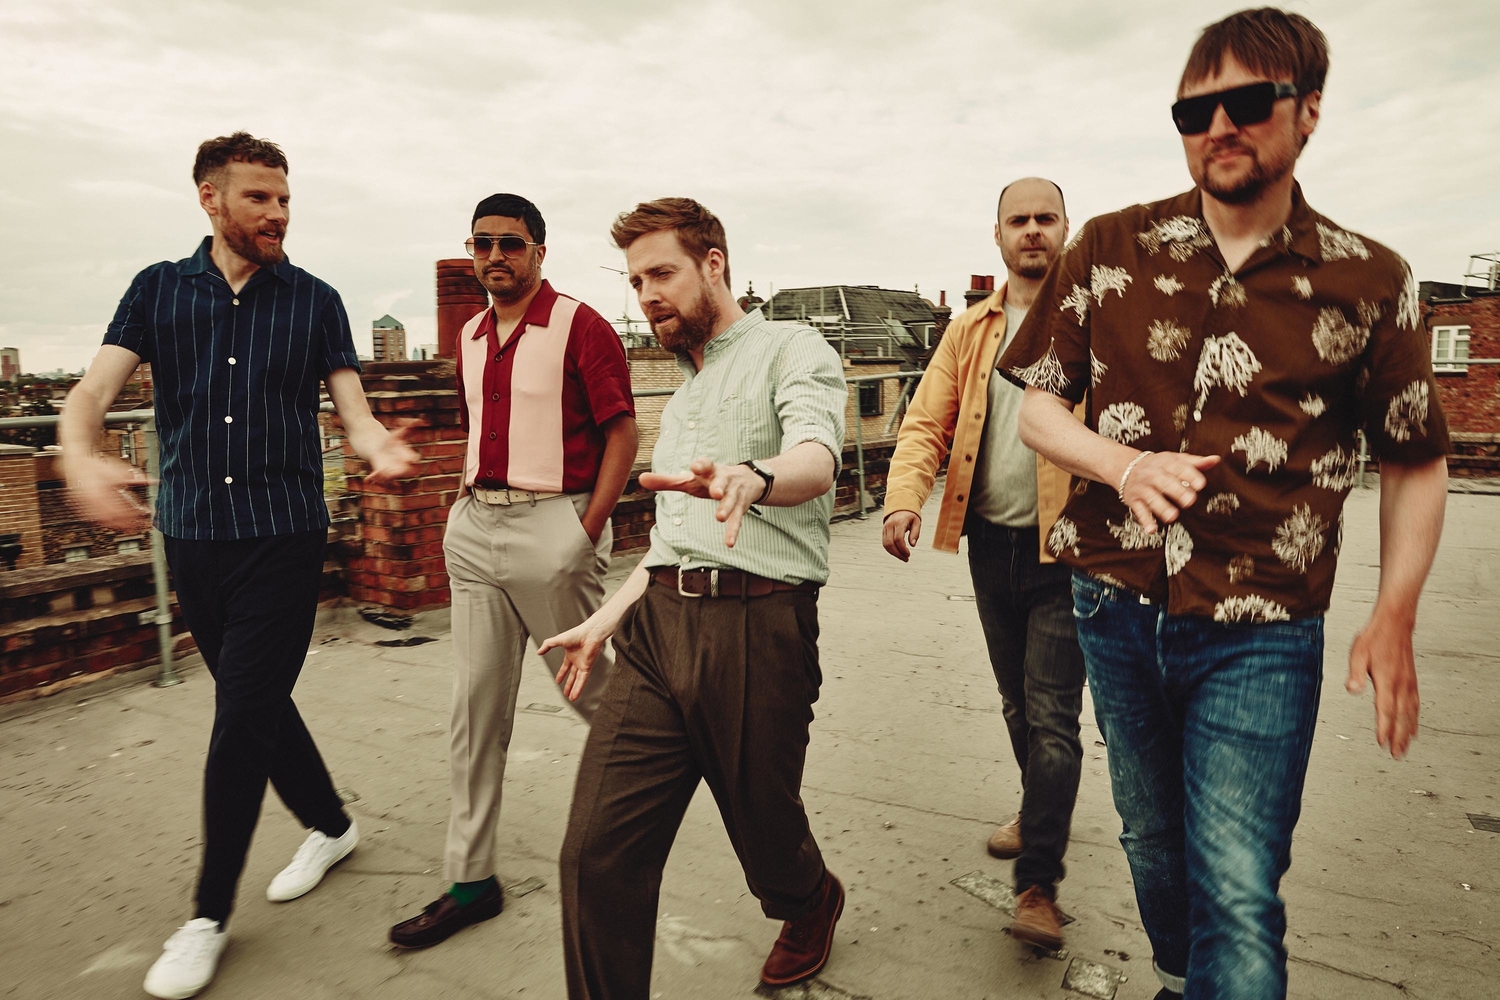 Kaiser Chiefs announce new album ‘Duck’, share track ‘Record Collection’